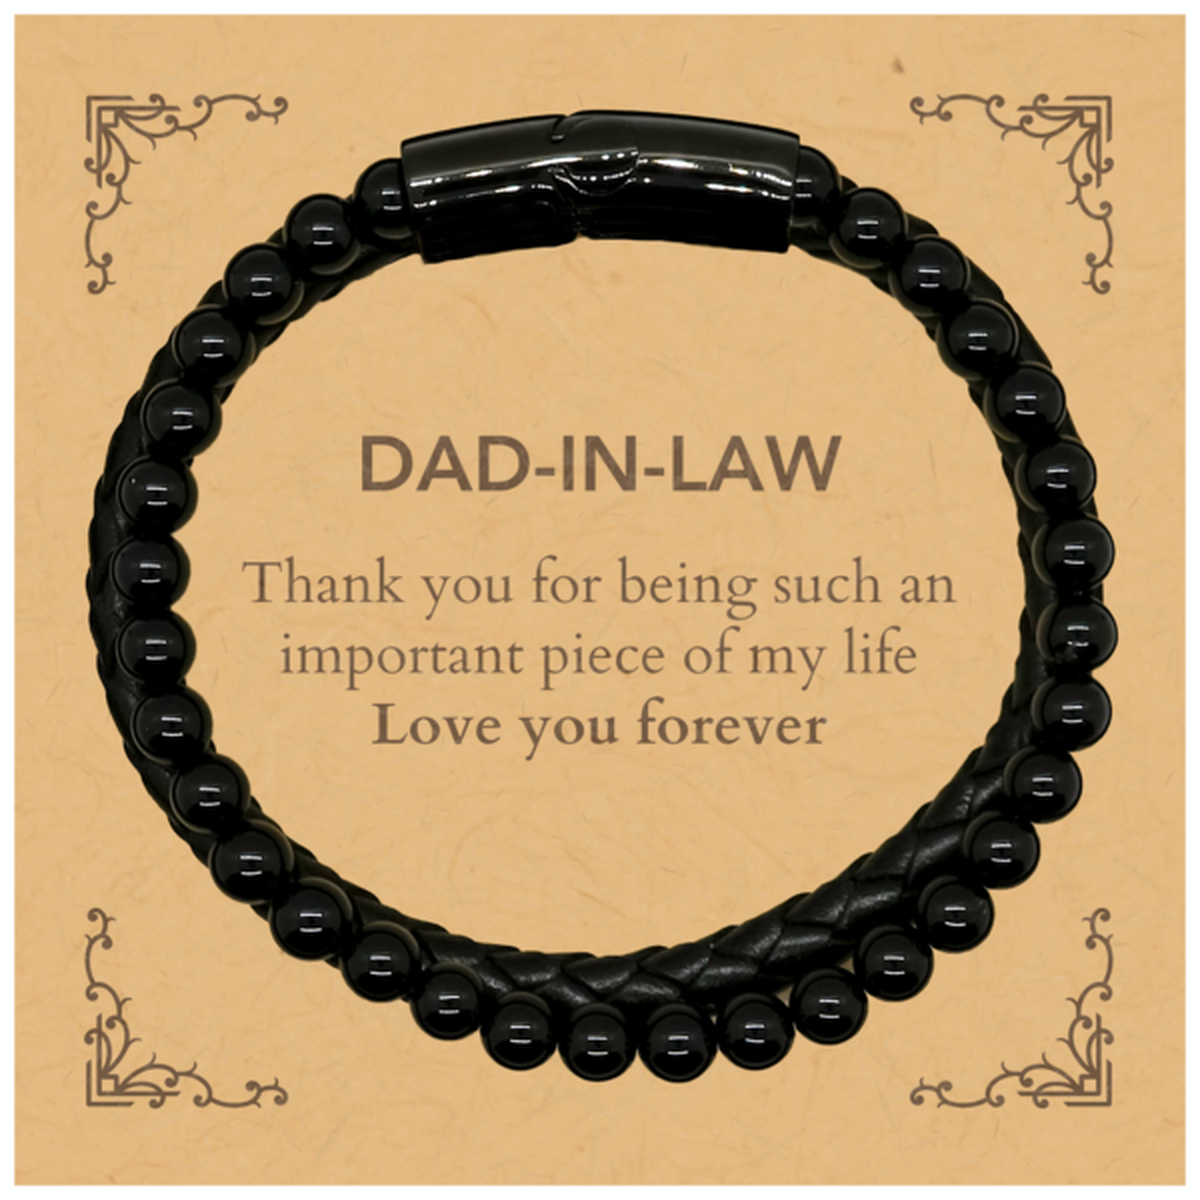 Appropriate Dad-in-law Stone Leather Bracelets Epic Birthday Gifts for Dad-in-law Thank you for being such an important piece of my life Dad-in-law Christmas Mothers Fathers Day